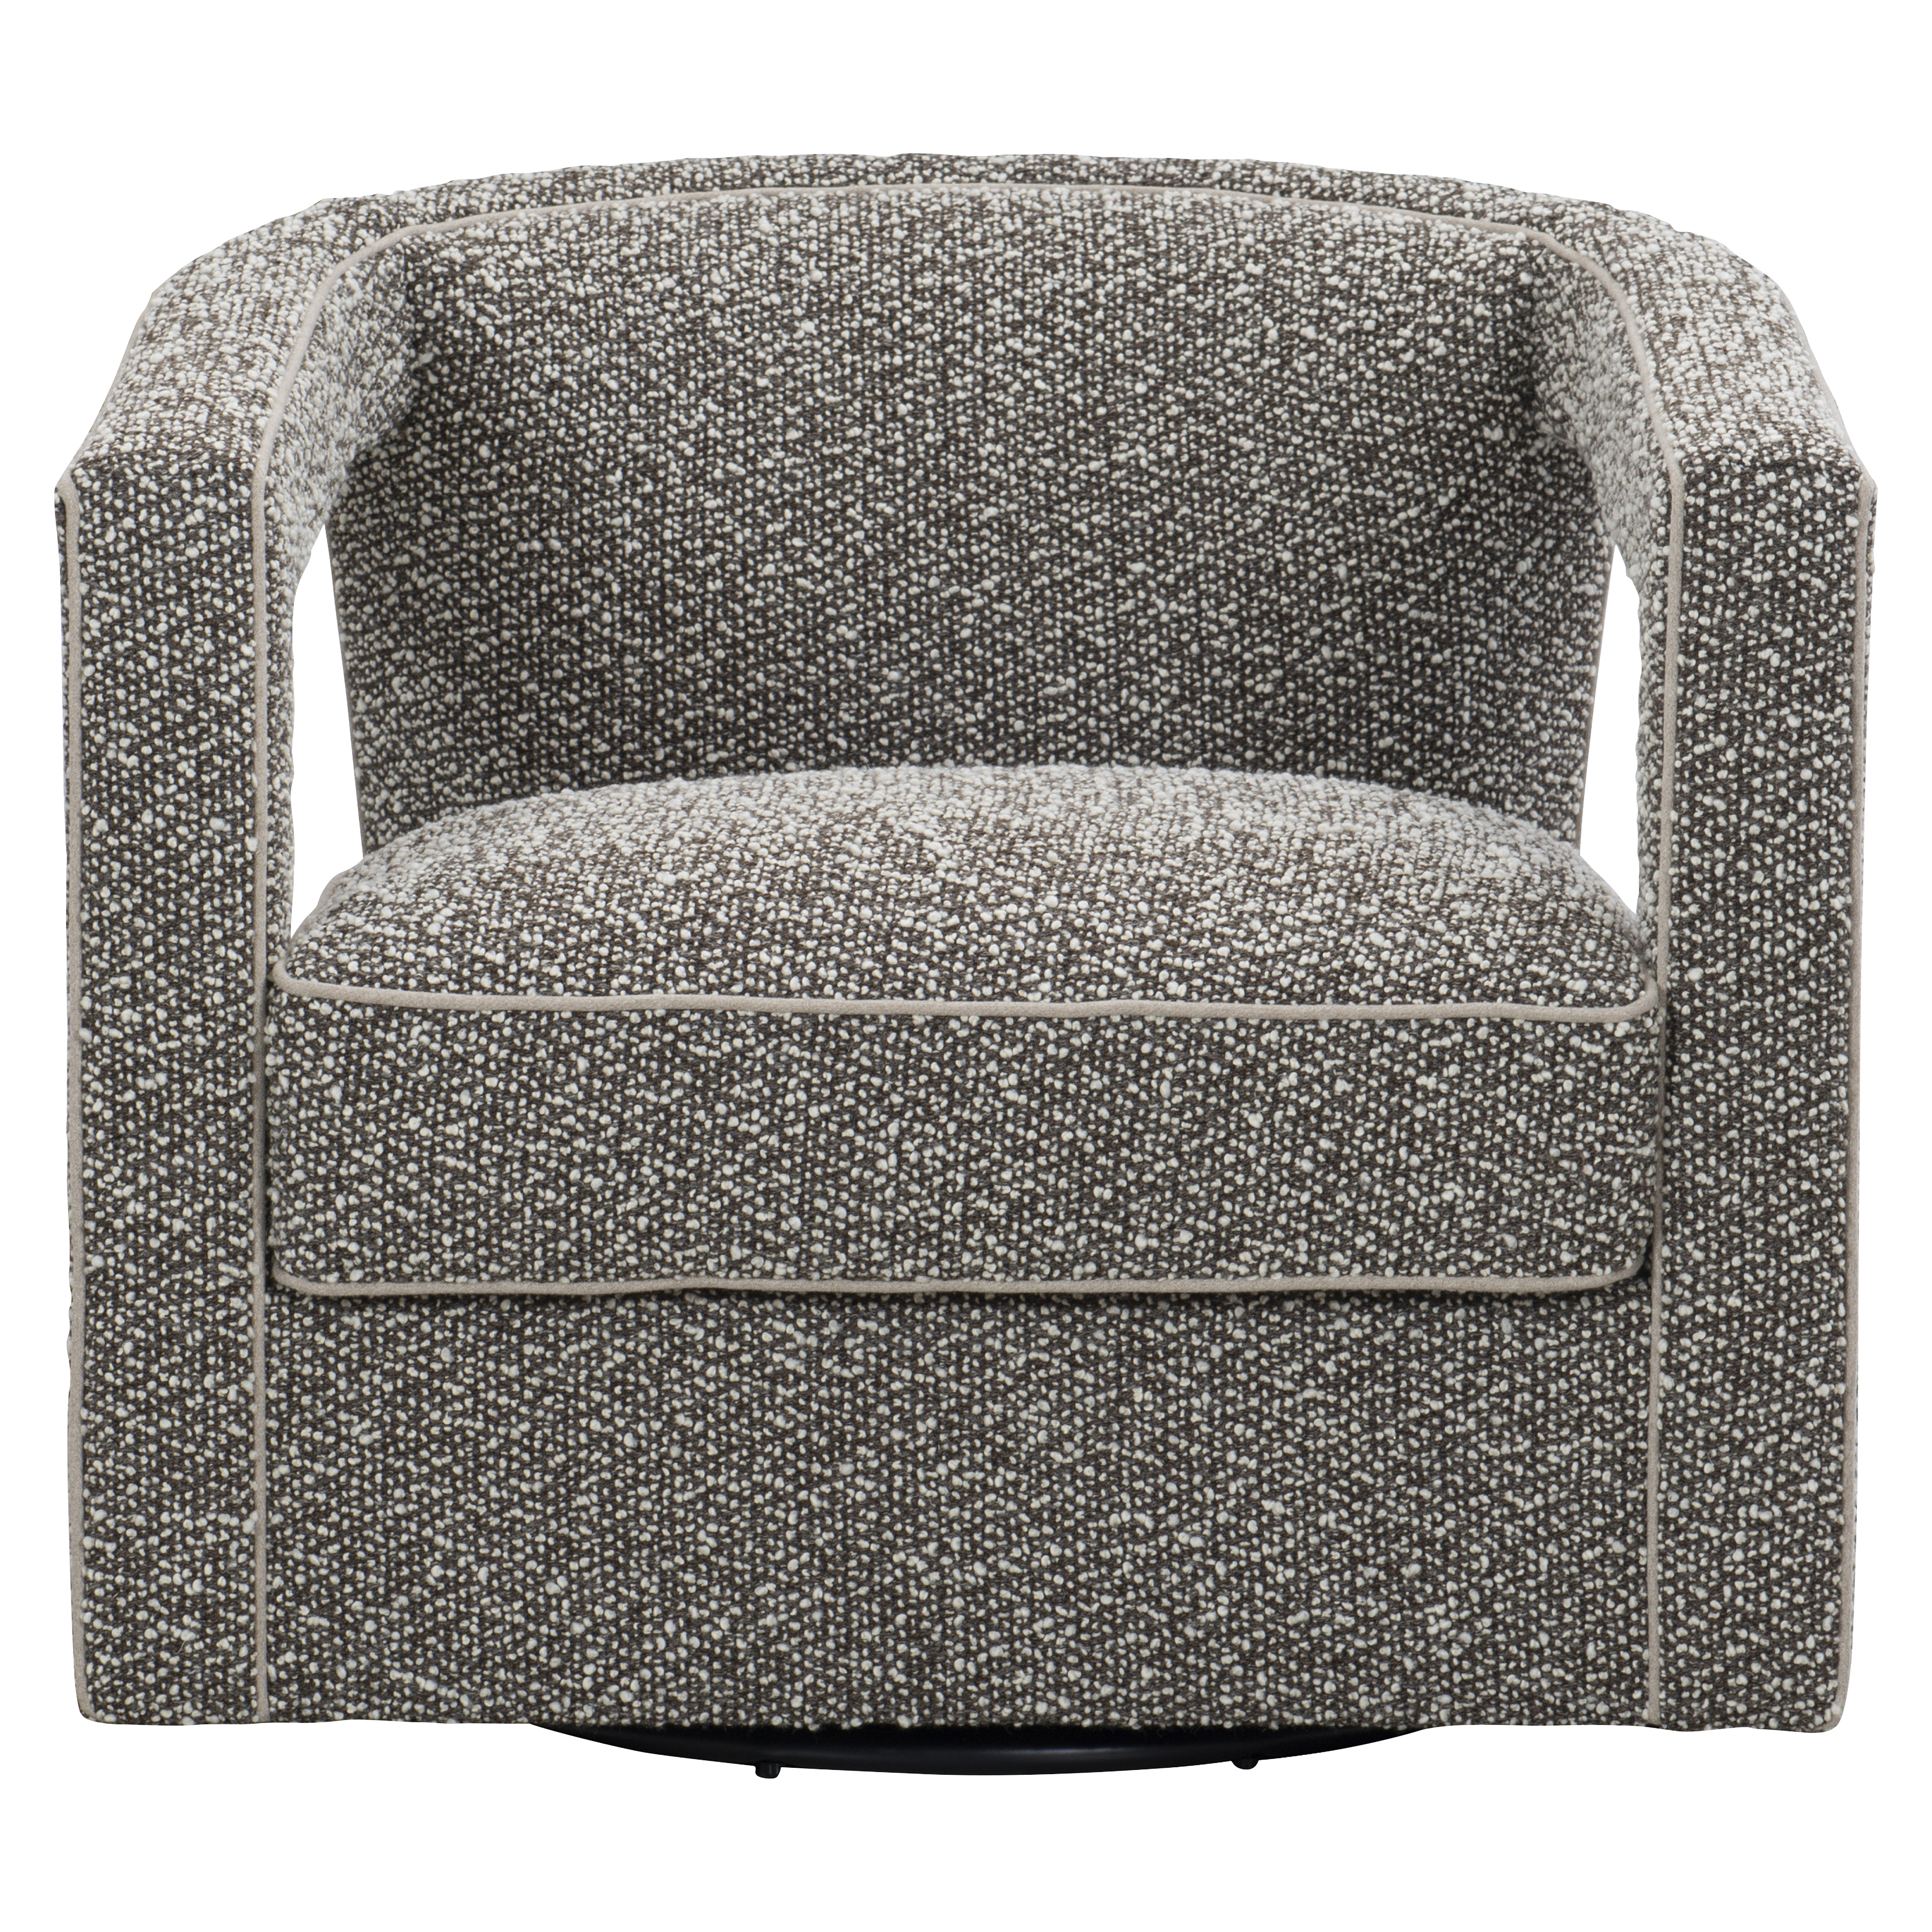 Picture of ALANA SWIVEL CHAIR